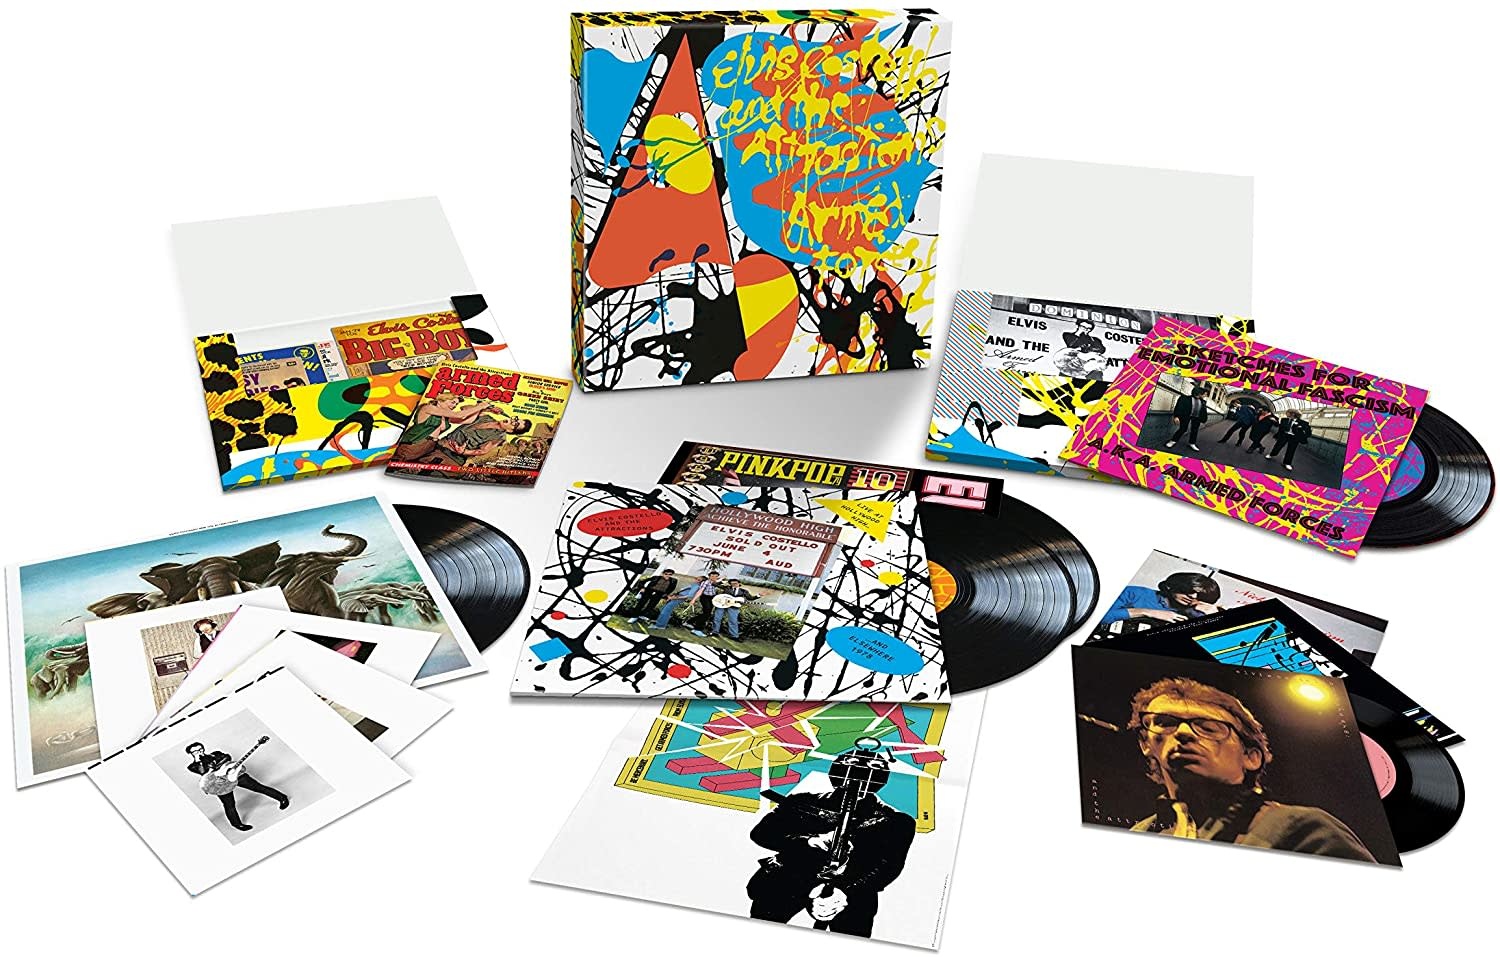 Rock/Pop Elvis Costello And The Attractions - Armed Forces (Complete 3xLP, 3x10", 3x7") (20% OFF! $239.99 -> $191.99)